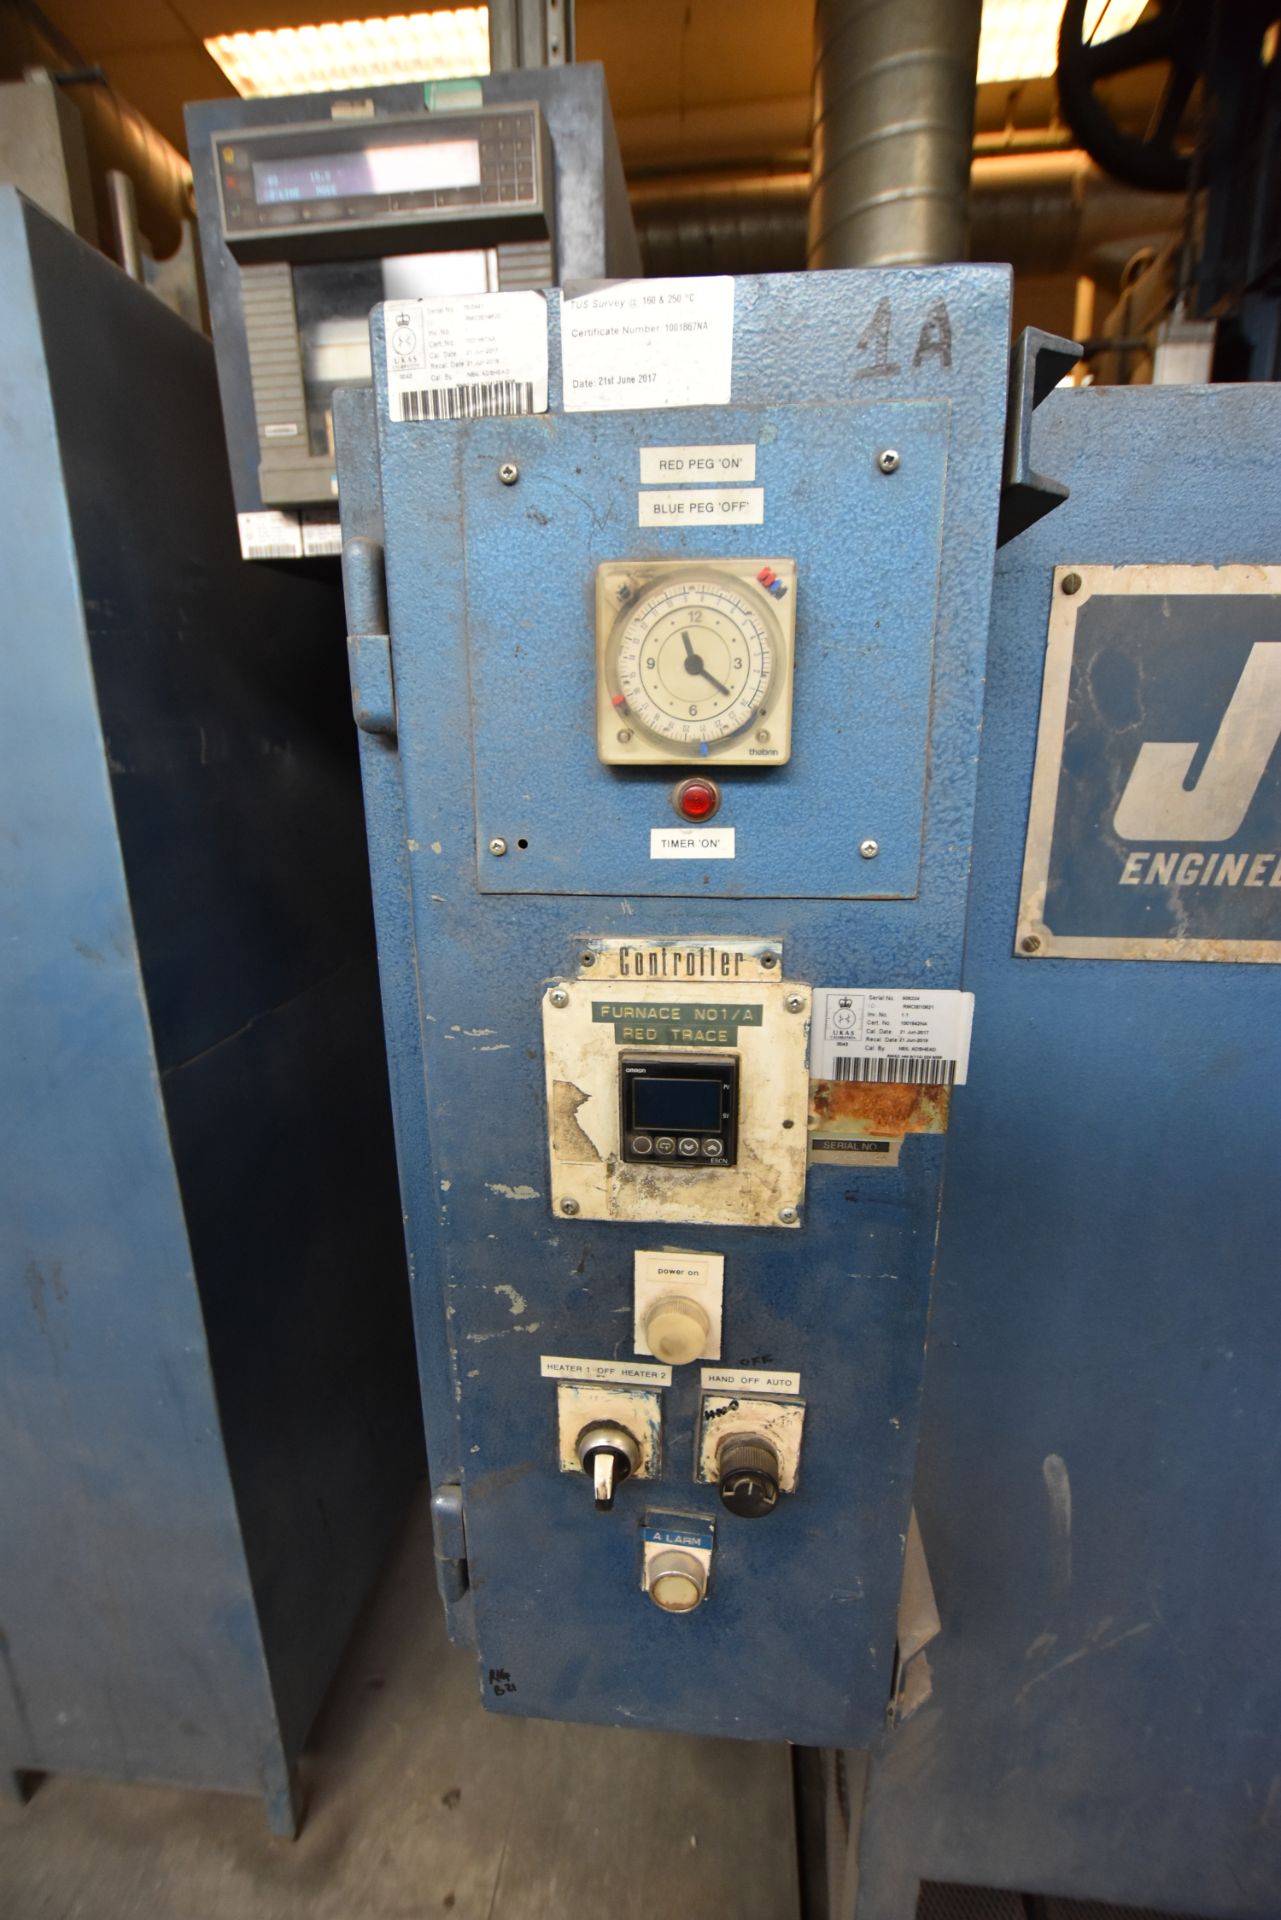 JLS Engineering Electric Batch Type Heat Treatment Oven, 550⁰c max temp, serial number: 79/3441 - Image 3 of 3